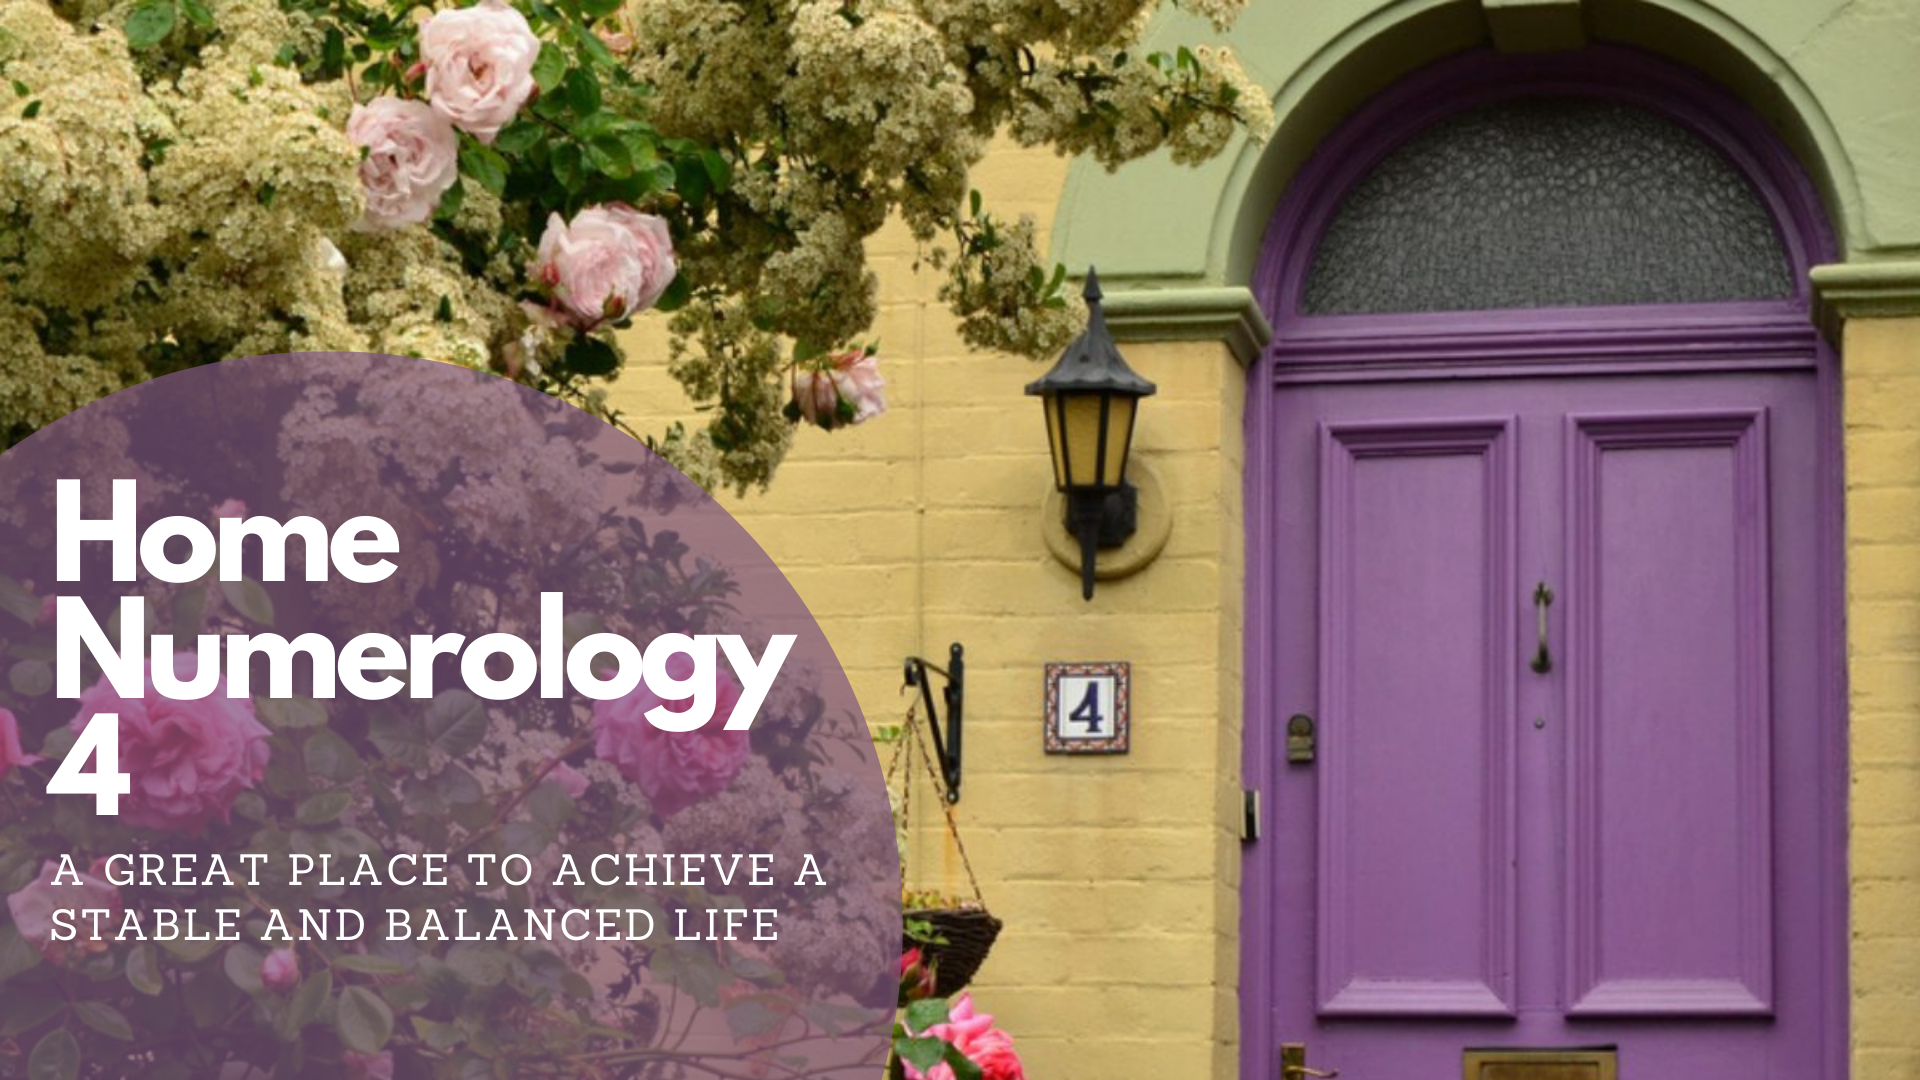 Home Numerology 4 - A Great Place To Achieve A Stable And Balanced Life